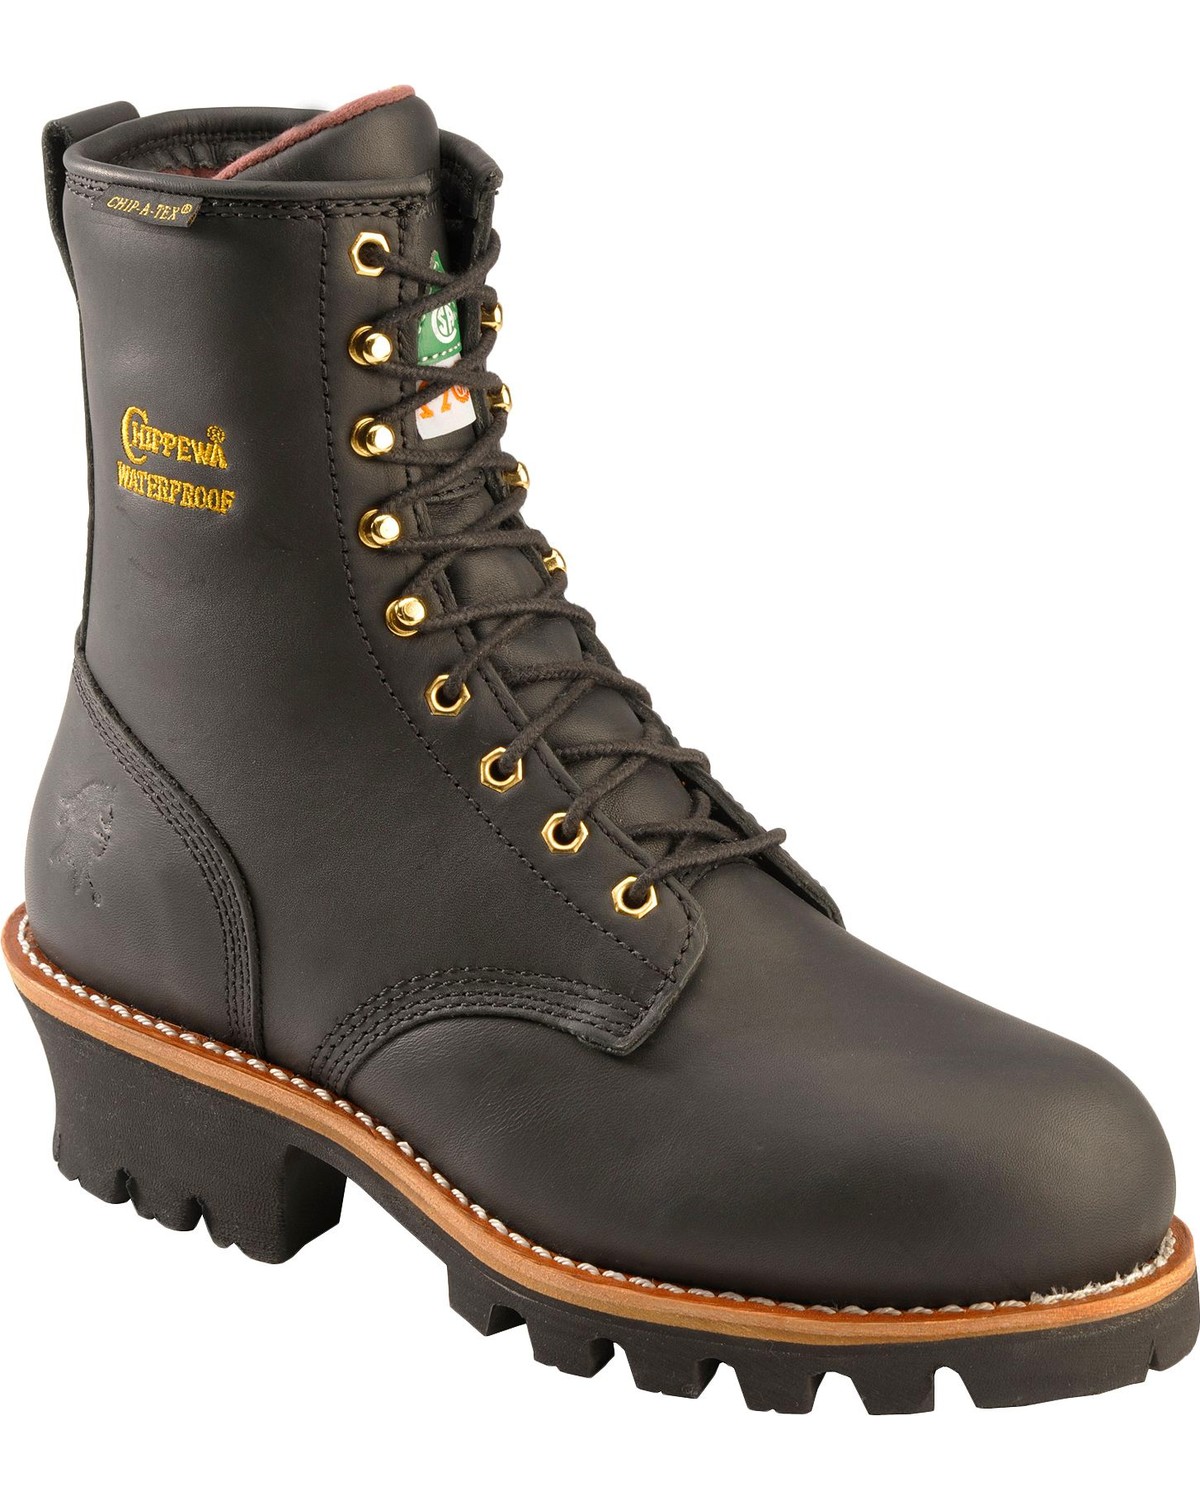 Chippewa Women's Oiled Waterproof & Insulated Logger Boots - Steel Toe